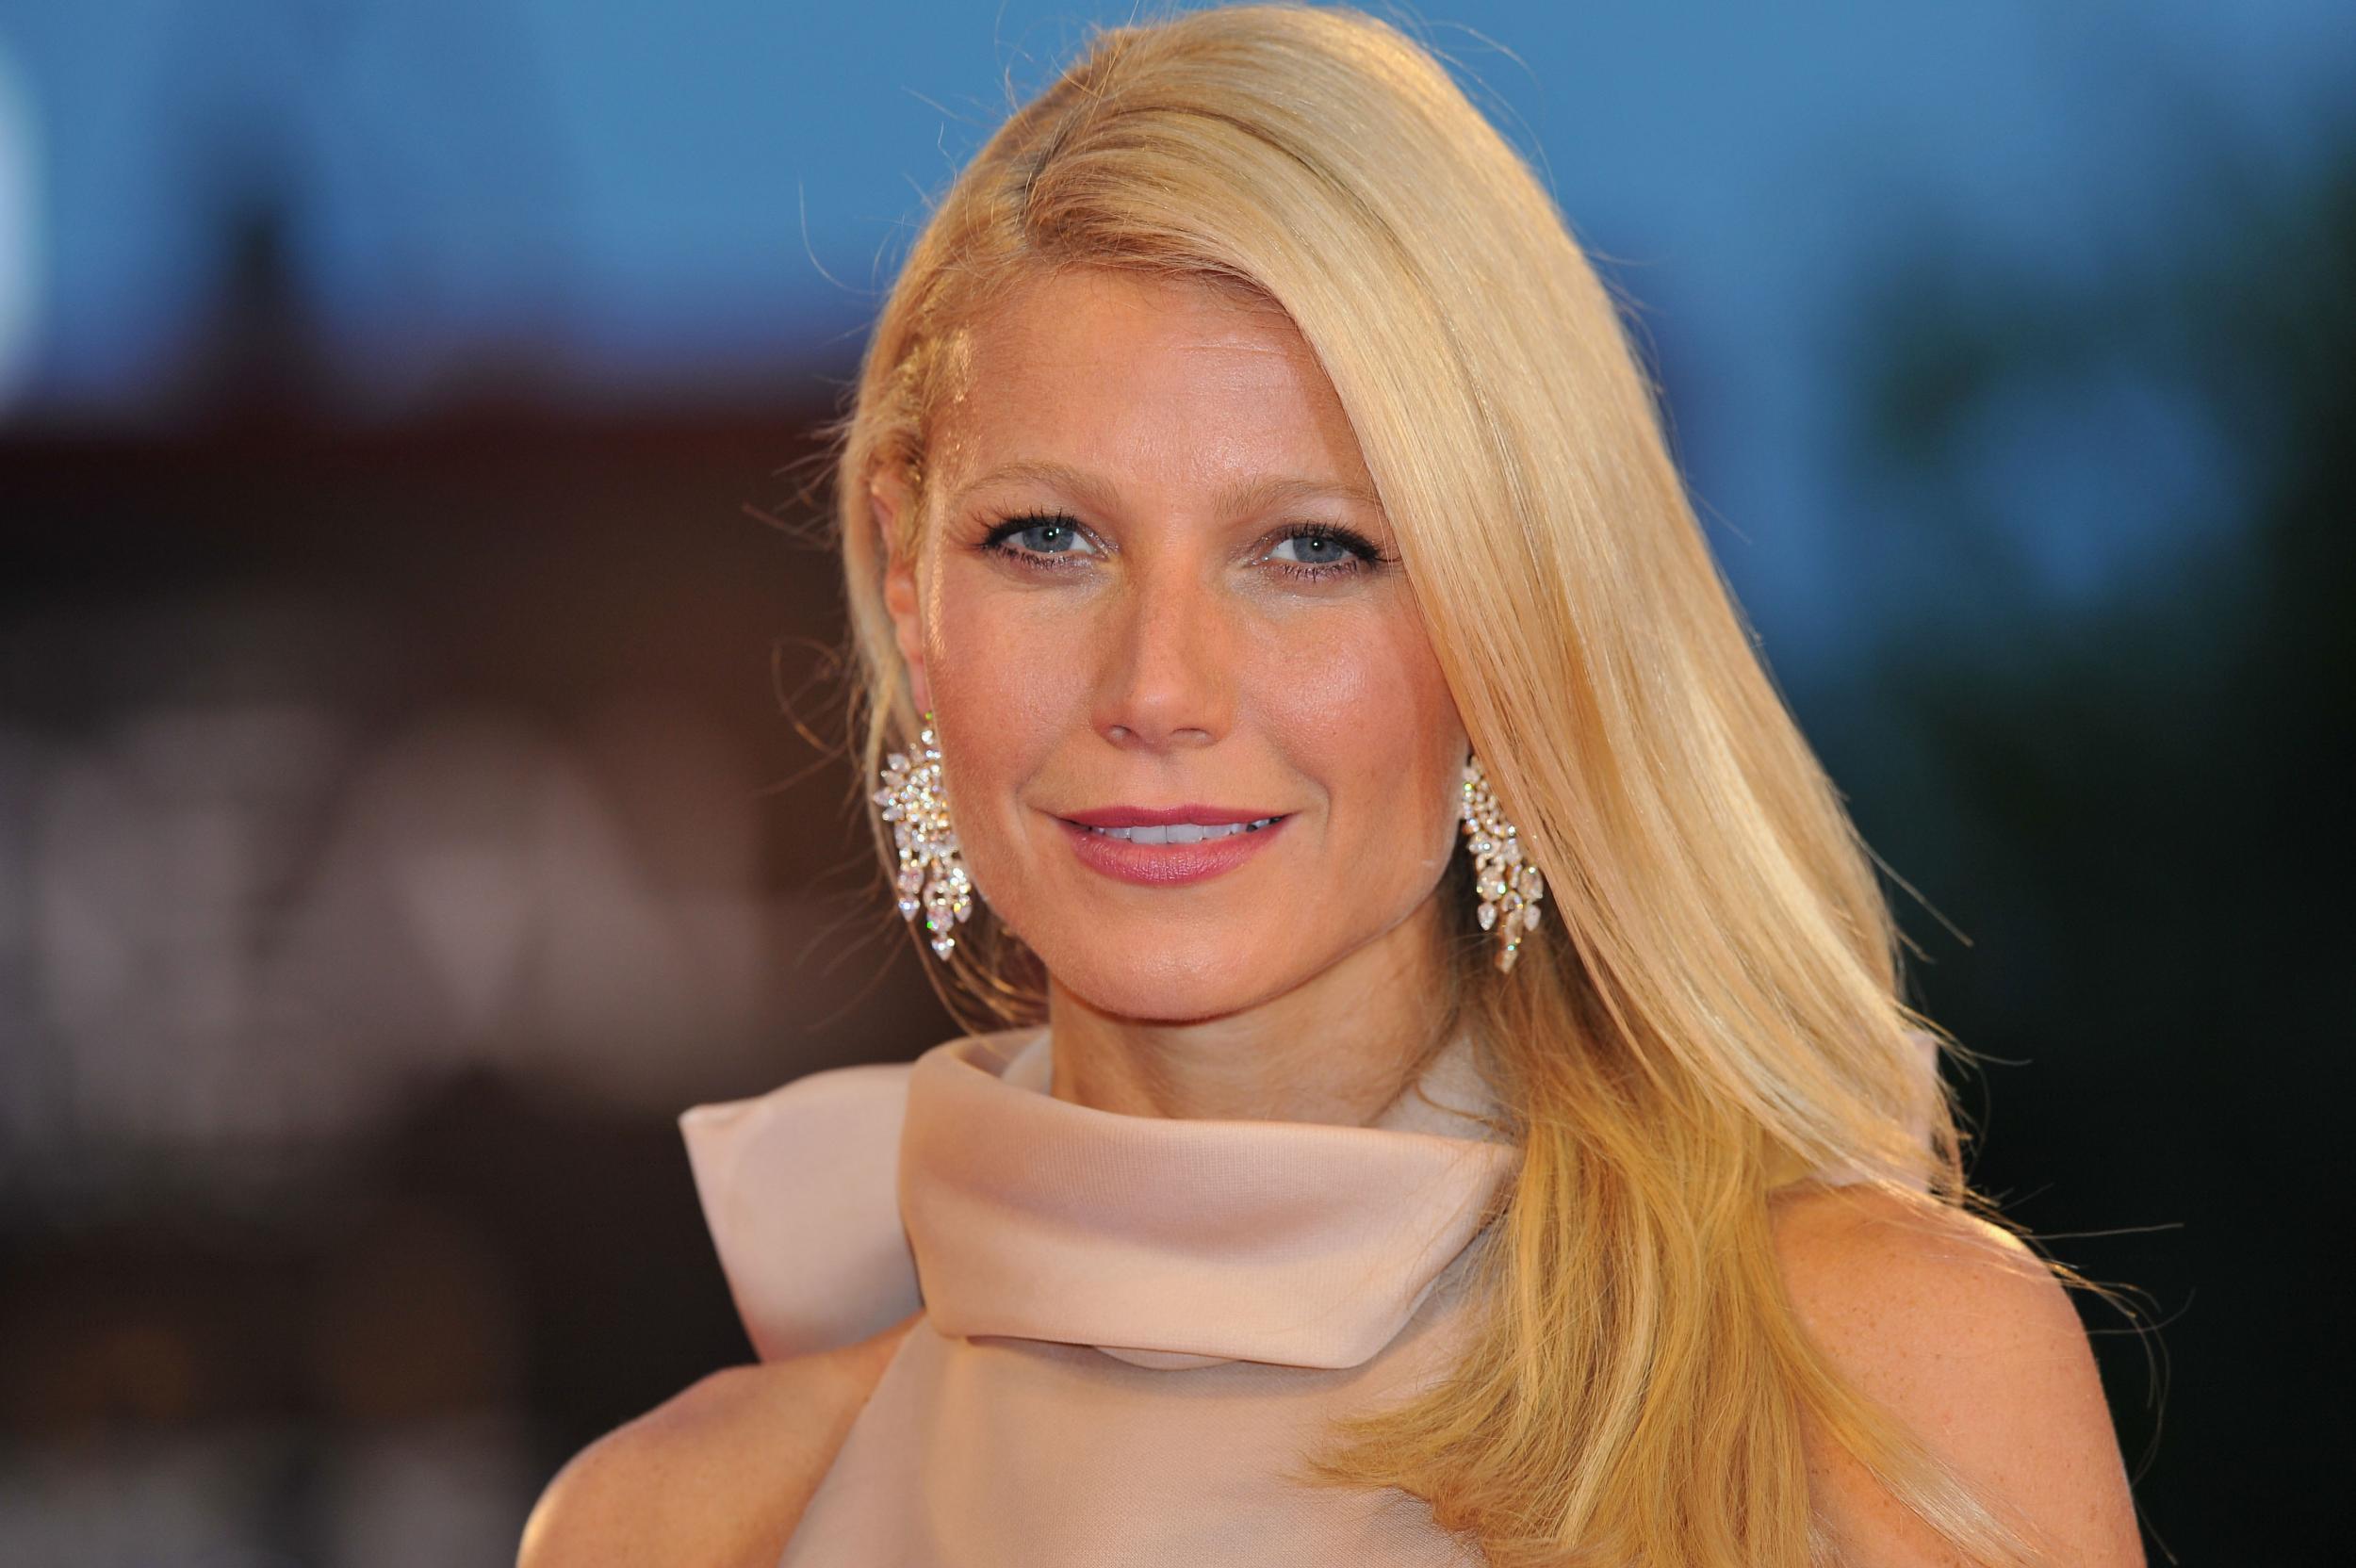 Gwyneth Paltrow opens up about 'conscious uncoupling' backlash following divorce from Chris Martin